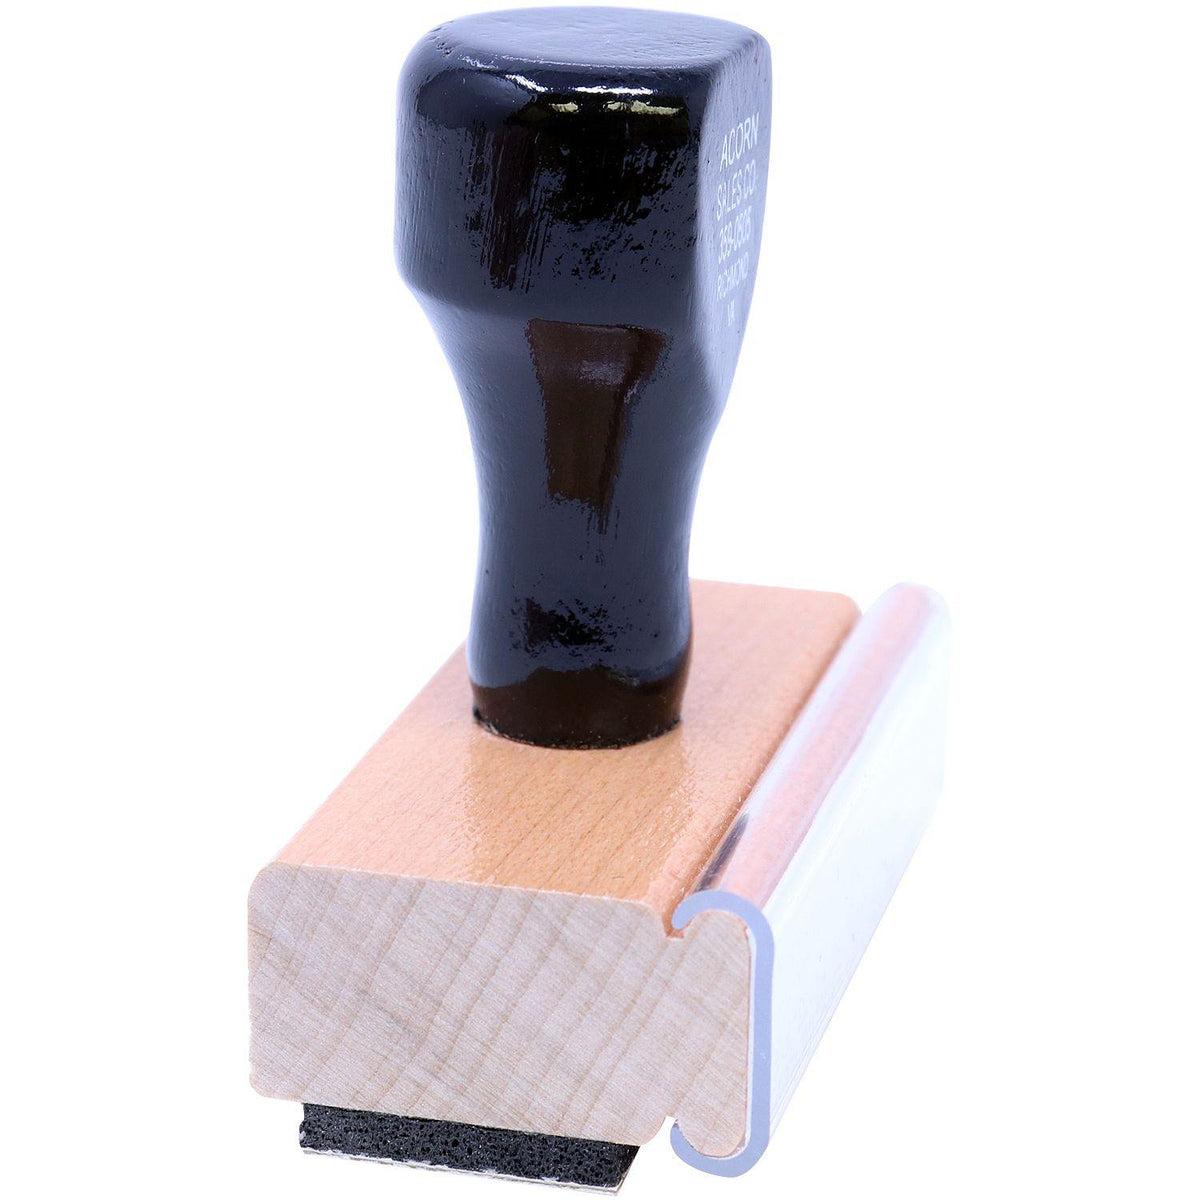 Large Strikeout Rubber Stamp - Engineer Seal Stamps - Brand_Acorn, Impression Size_Large, Stamp Type_Regular Stamp, Type of Use_General, Type of Use_Legal, Type of Use_Office